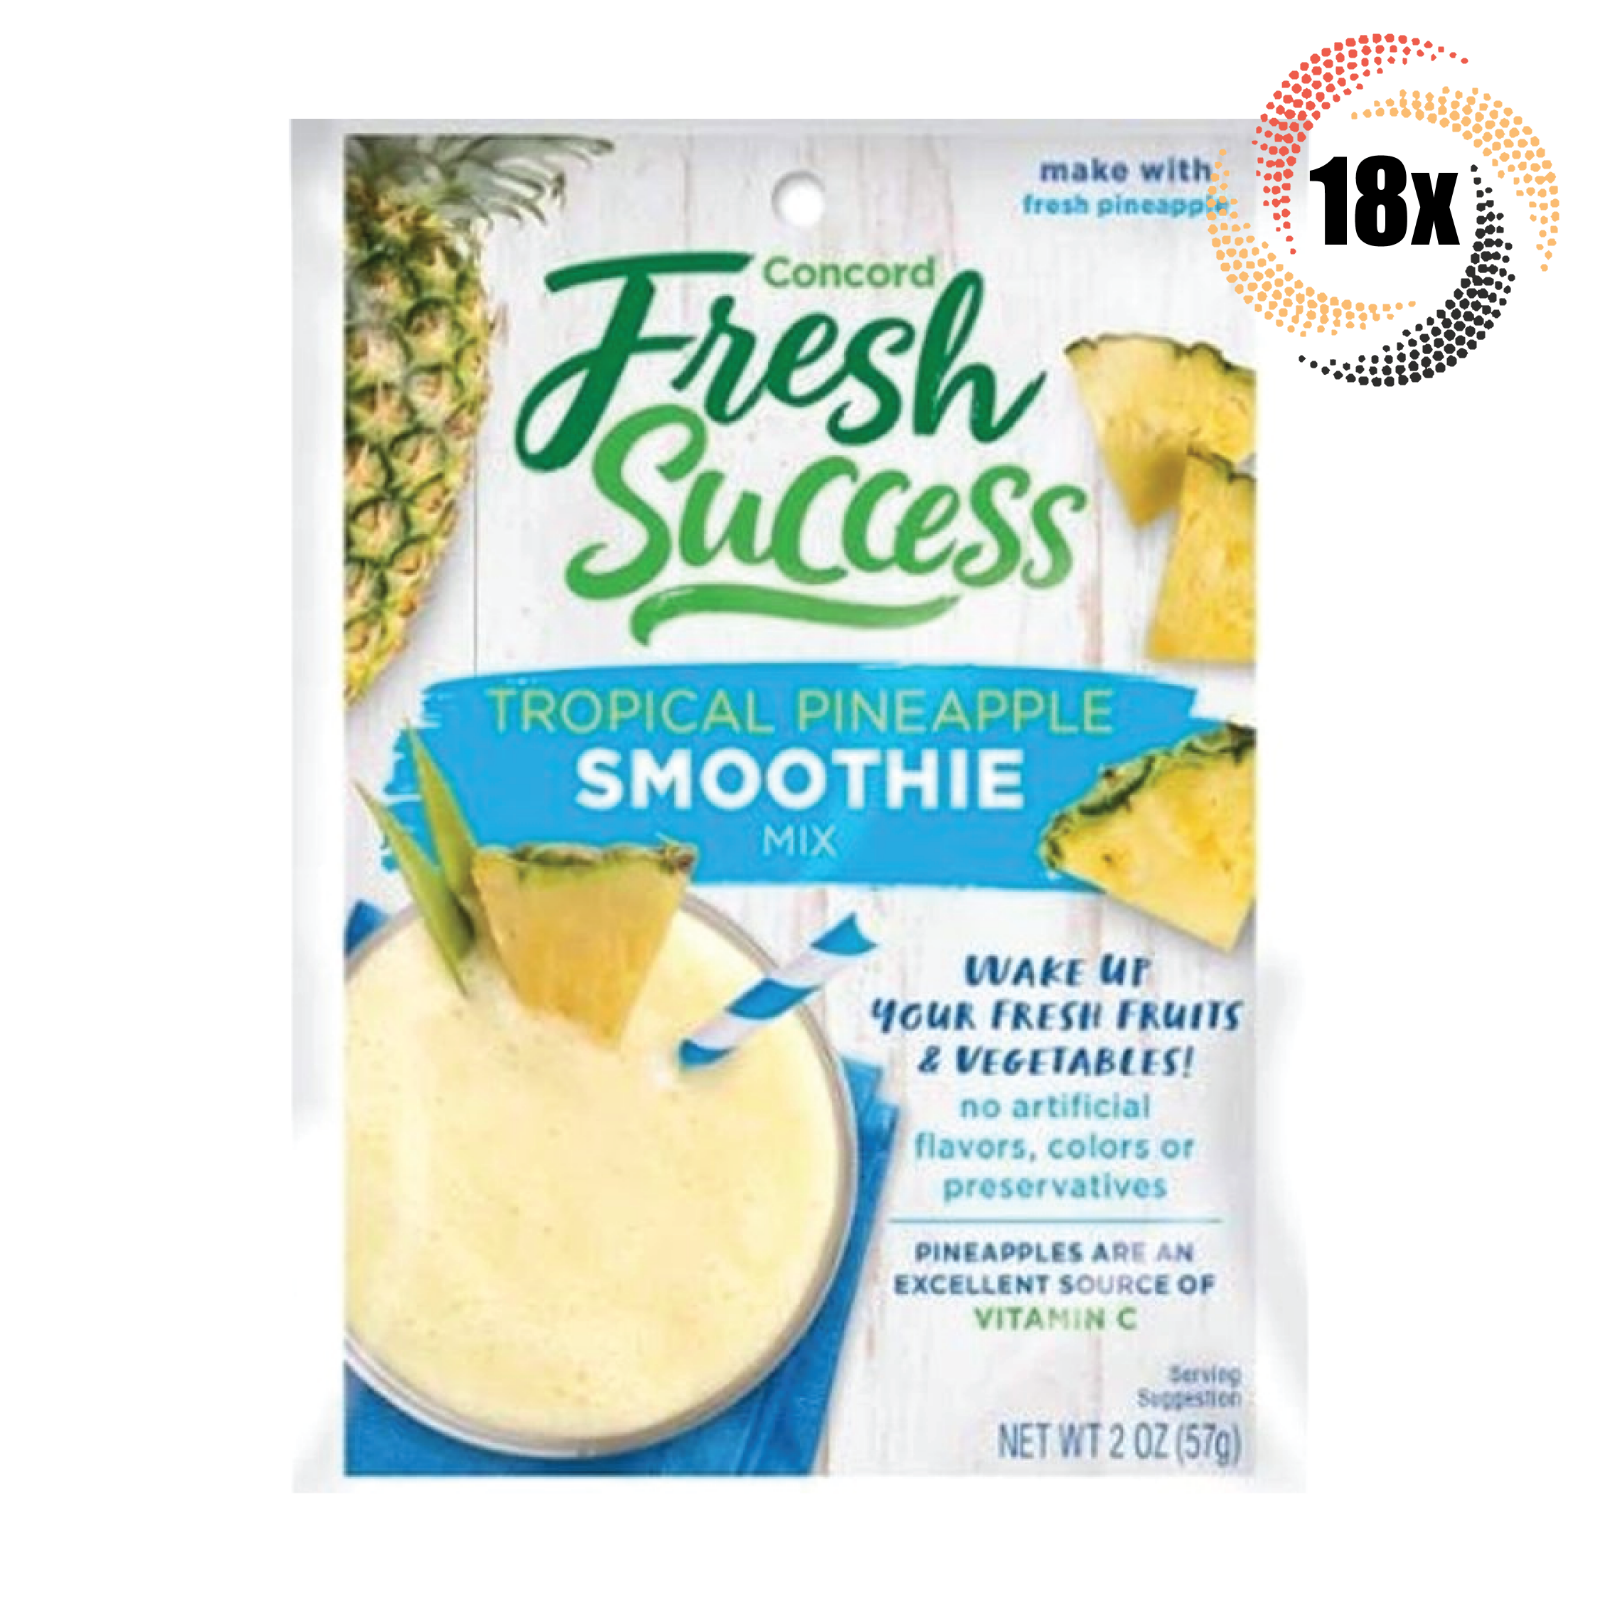 18x Packs Concord Fresh Success Tropical Pineapple Smoothie Drink Mix | 2oz - $35.69